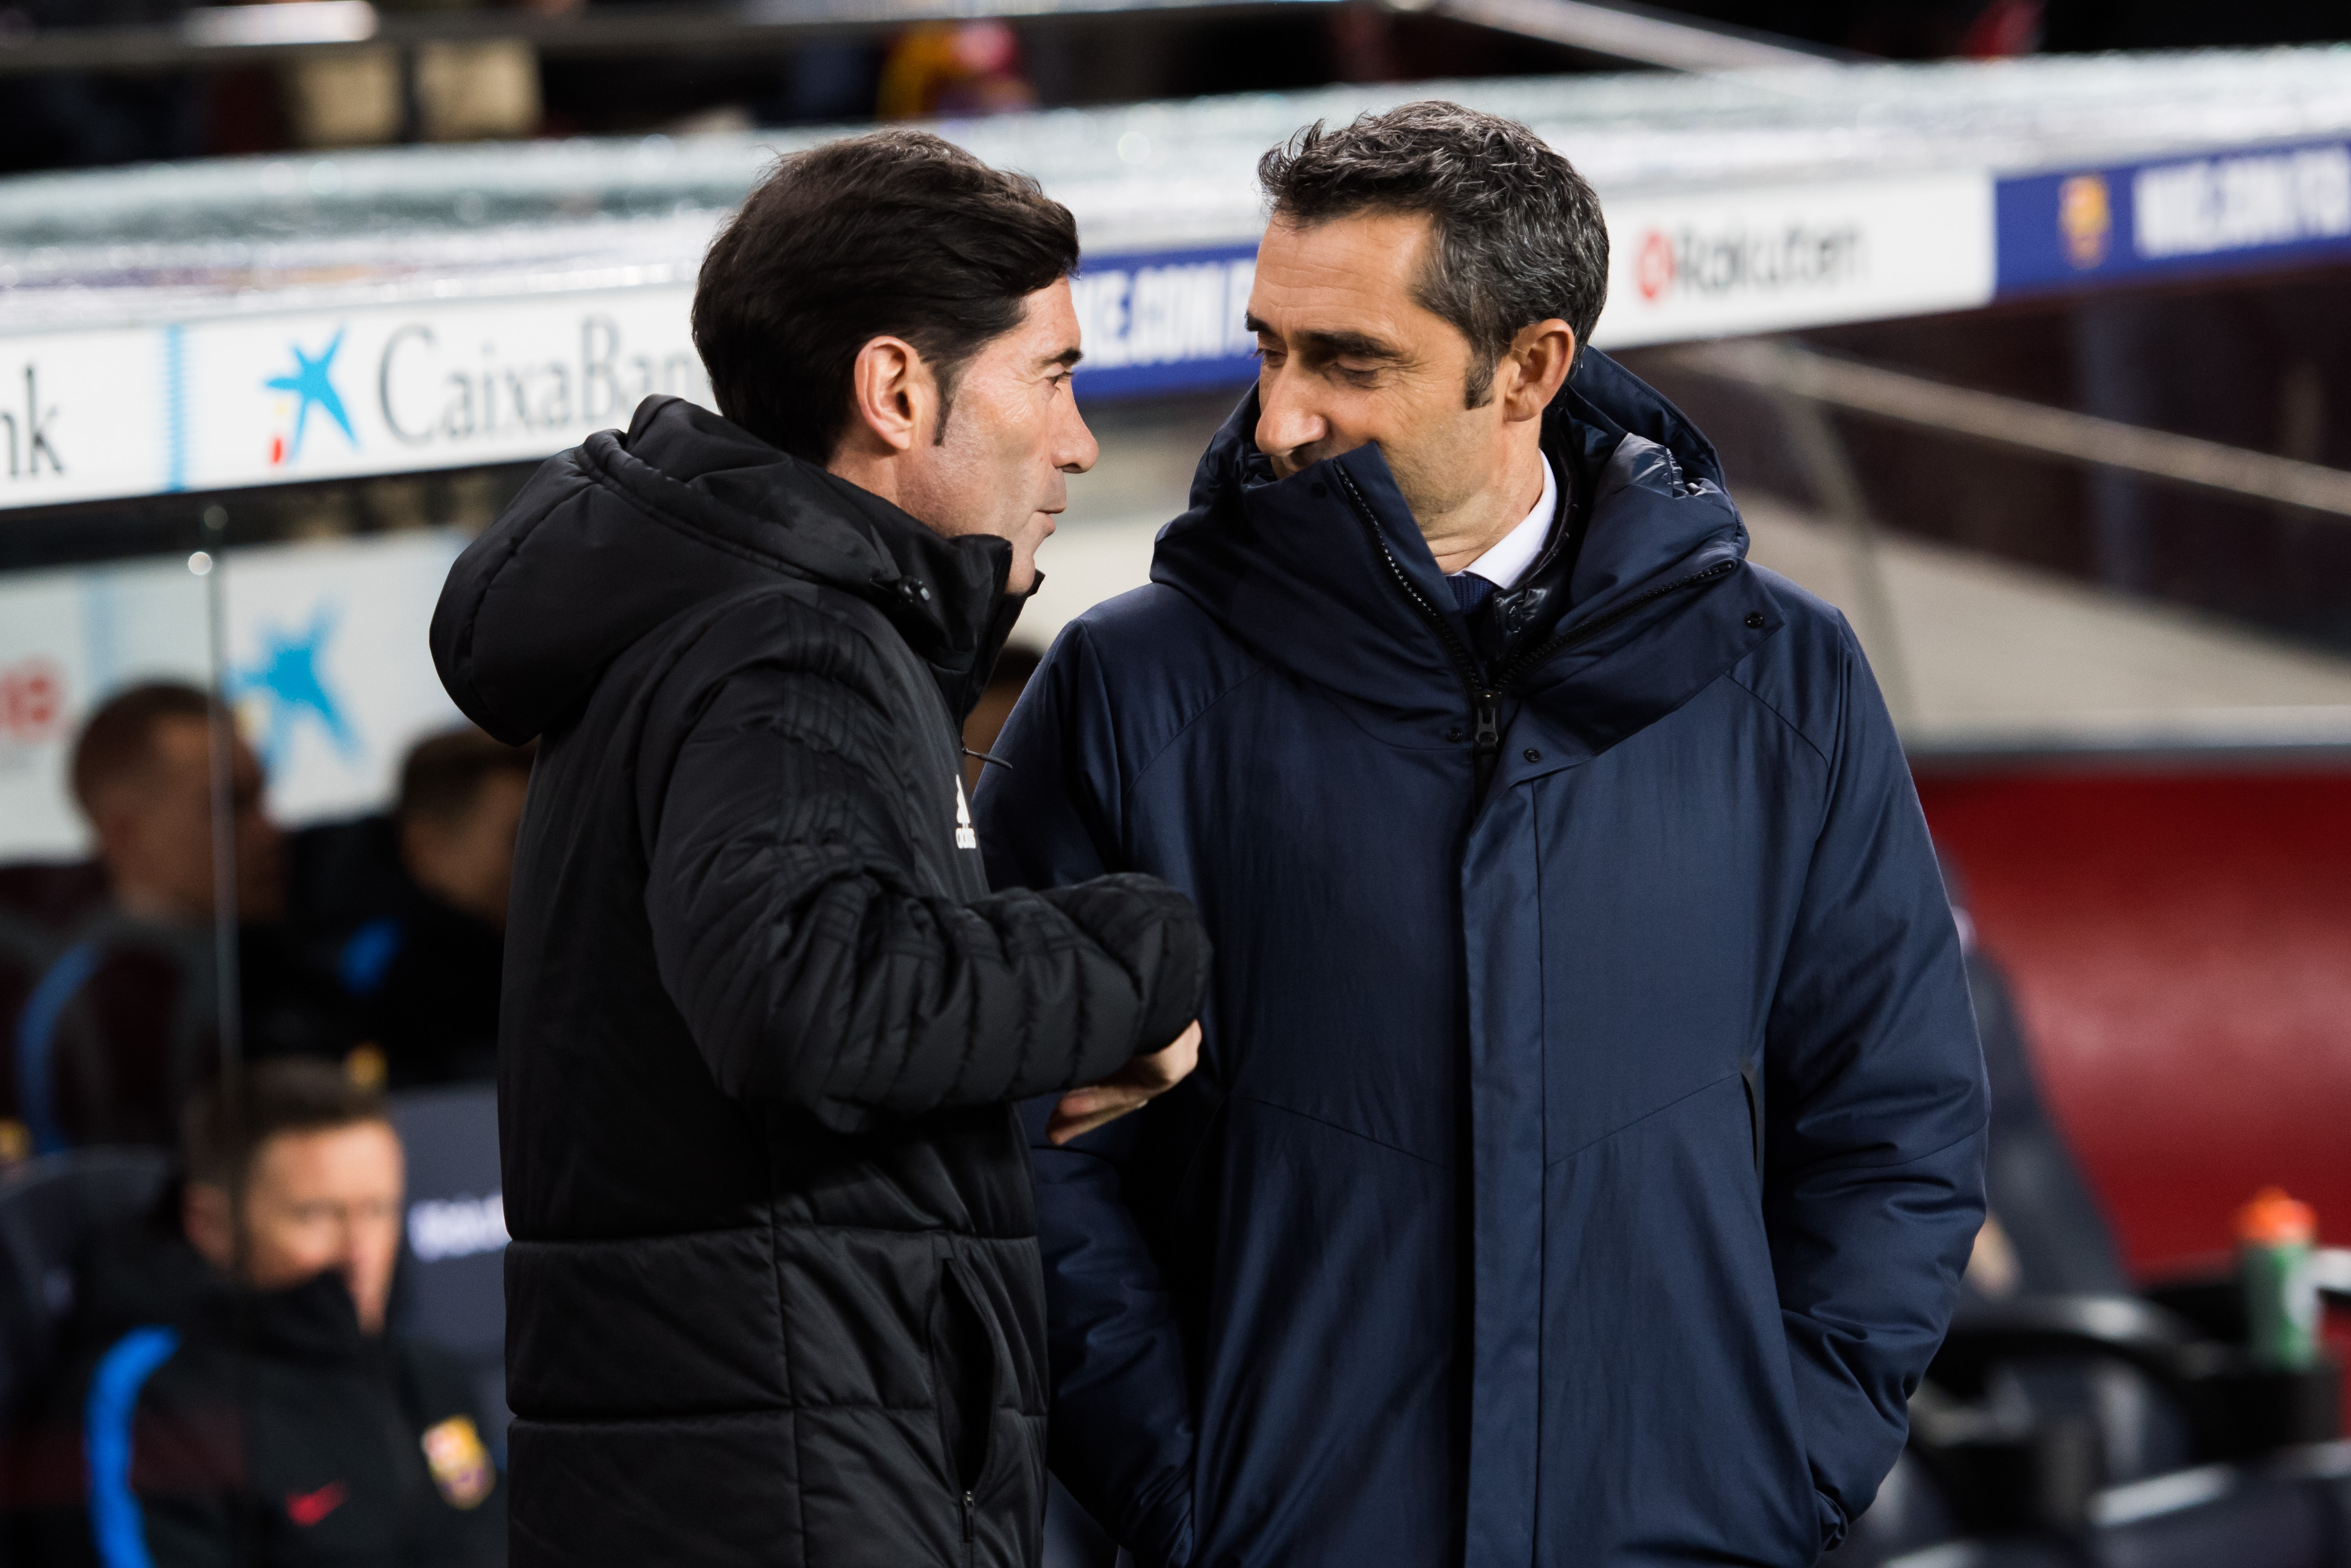 BARCELONA, SPAIN - FEBRUARY 01:  Head Coach Marcelino Garcia Toral of Valencia CF and Head coach Ernesto Valverde of FC Barcelona talk before  the Copa del Rey semi-final first leg match between FC Barcelona and Valencia CF at Camp Nou on February 1, 2018 in Barcelona, Spain.  (Photo by Alex Caparros/Getty Images)